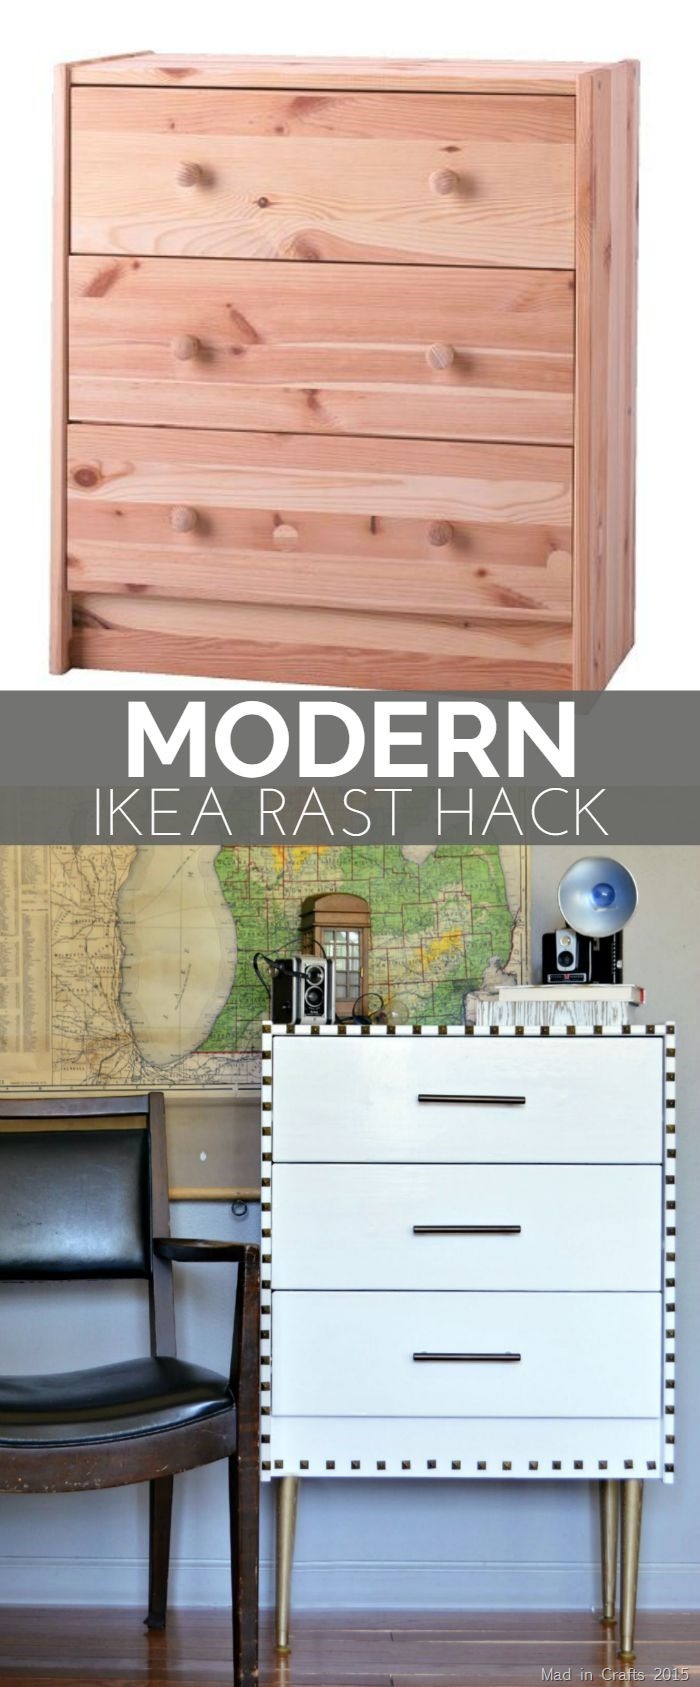 Ikea Rast Hack Before and After